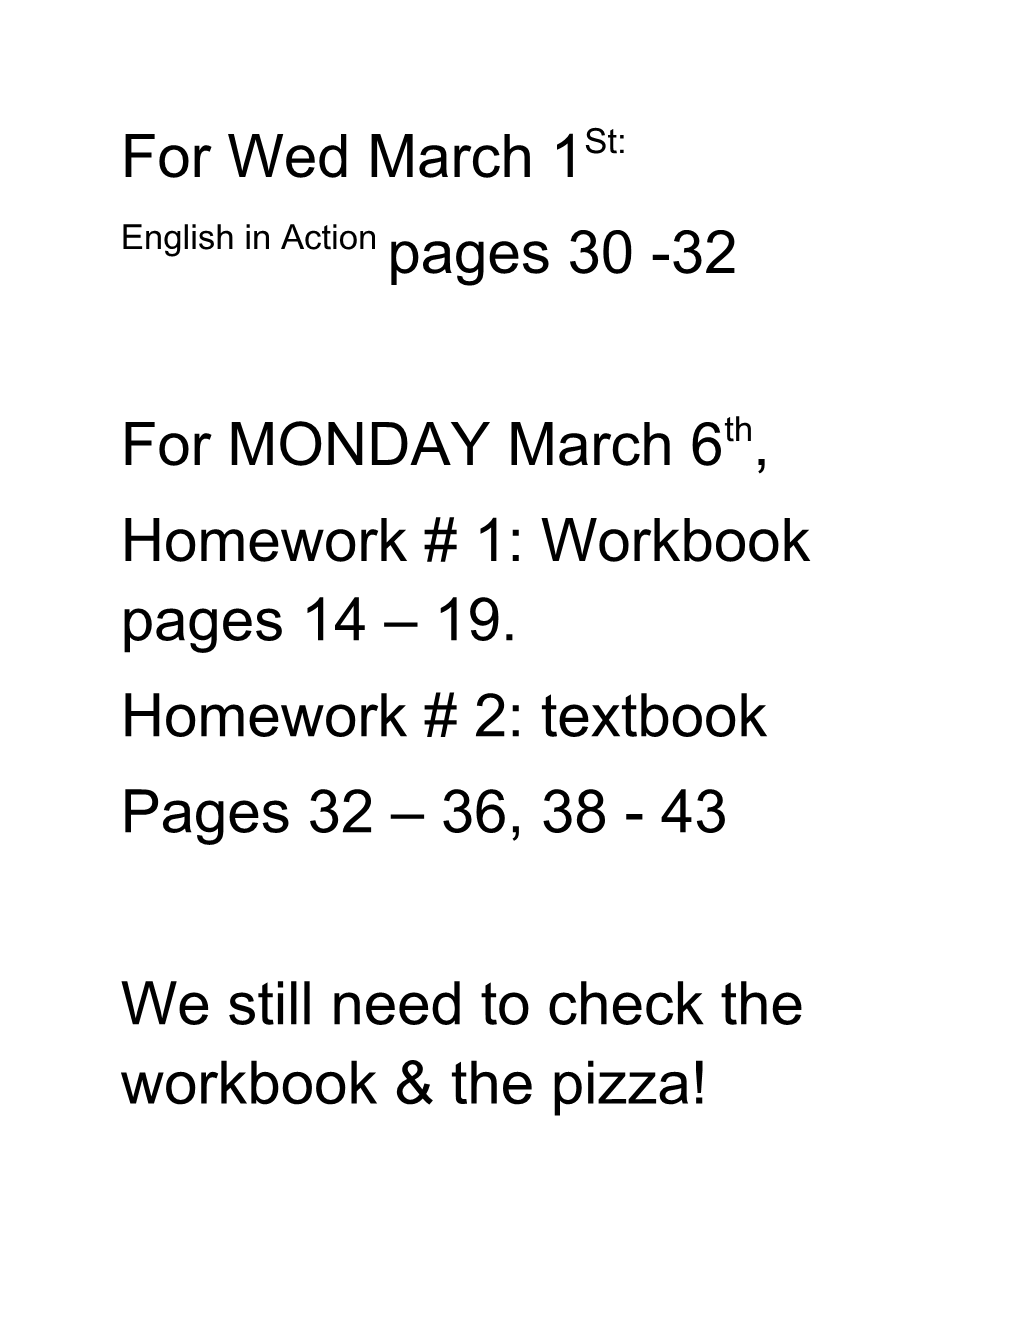 We Still Need to Check the Workbook & the Pizza!